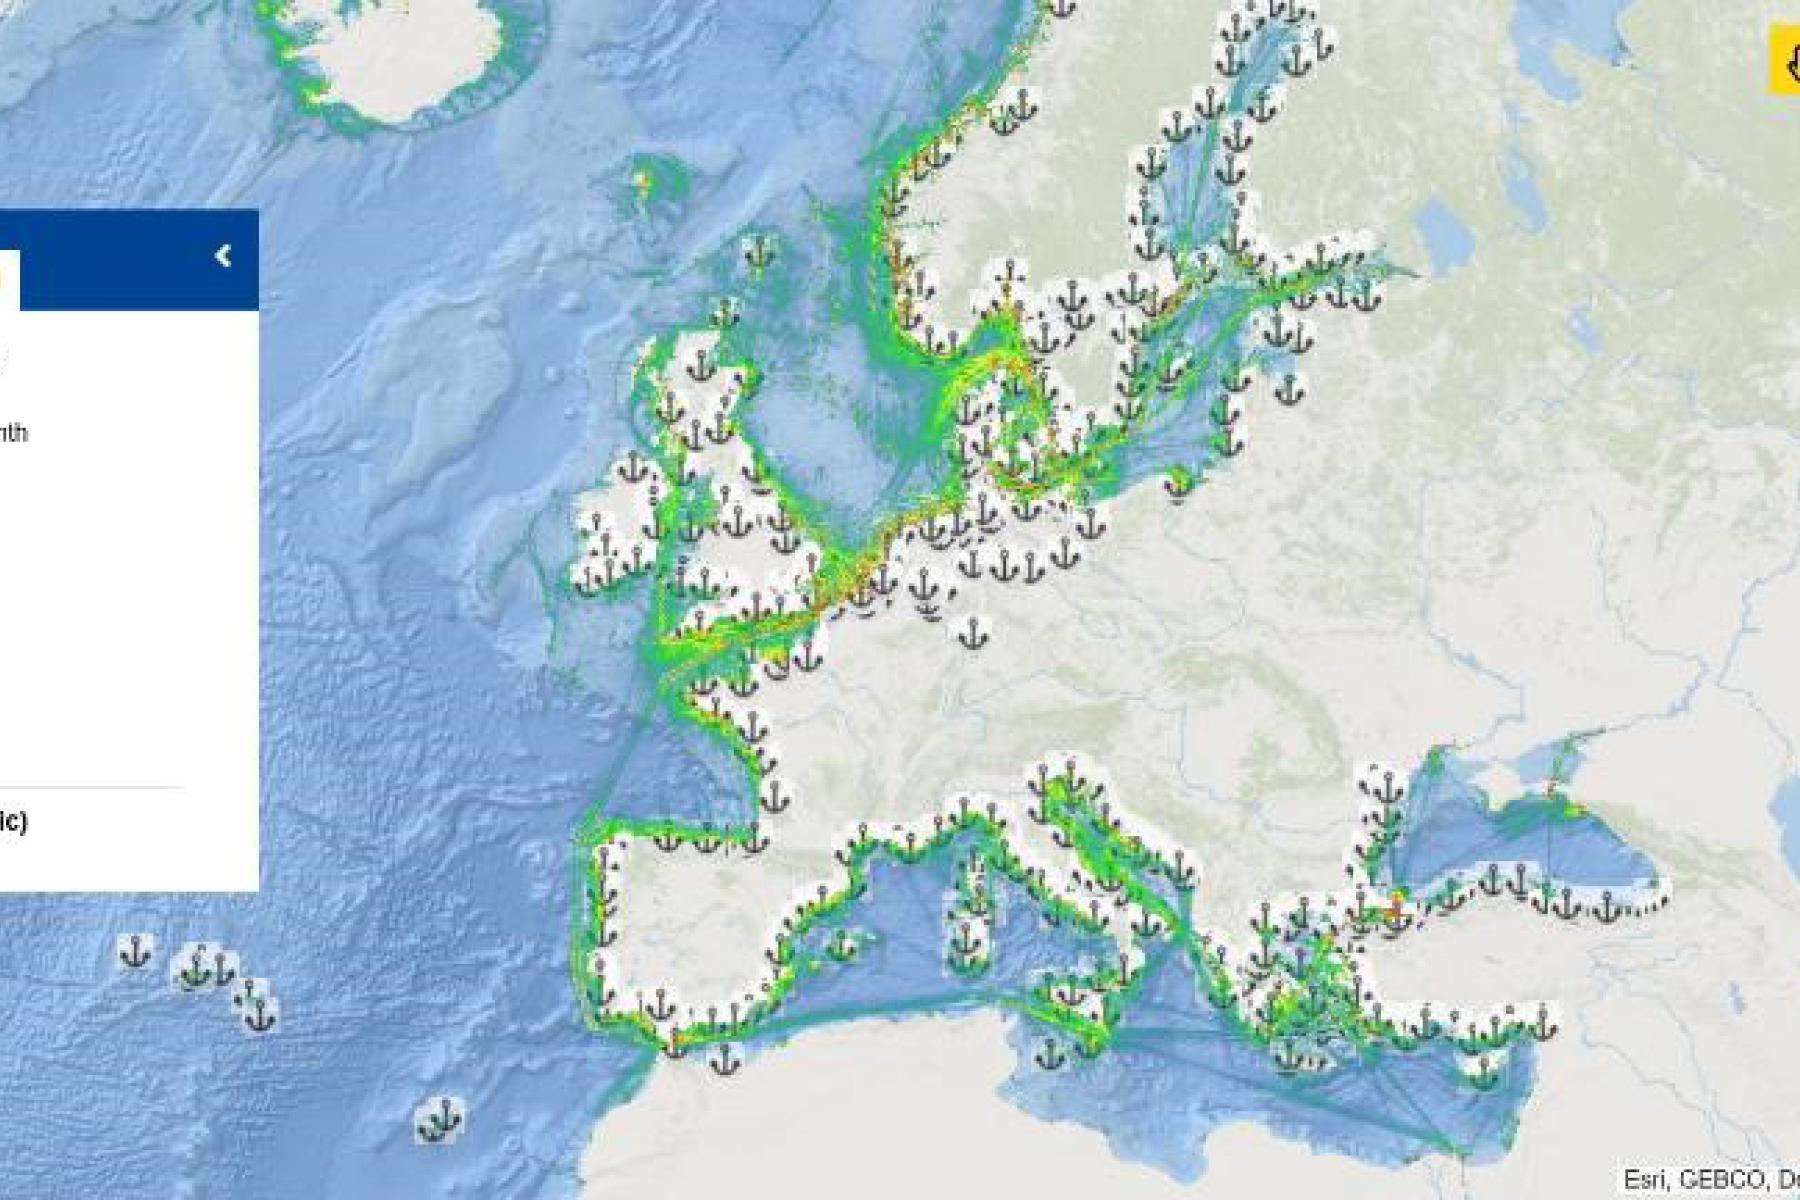 This map shows the main ports in Europe and the maritime traffic on the European seas in 2021.